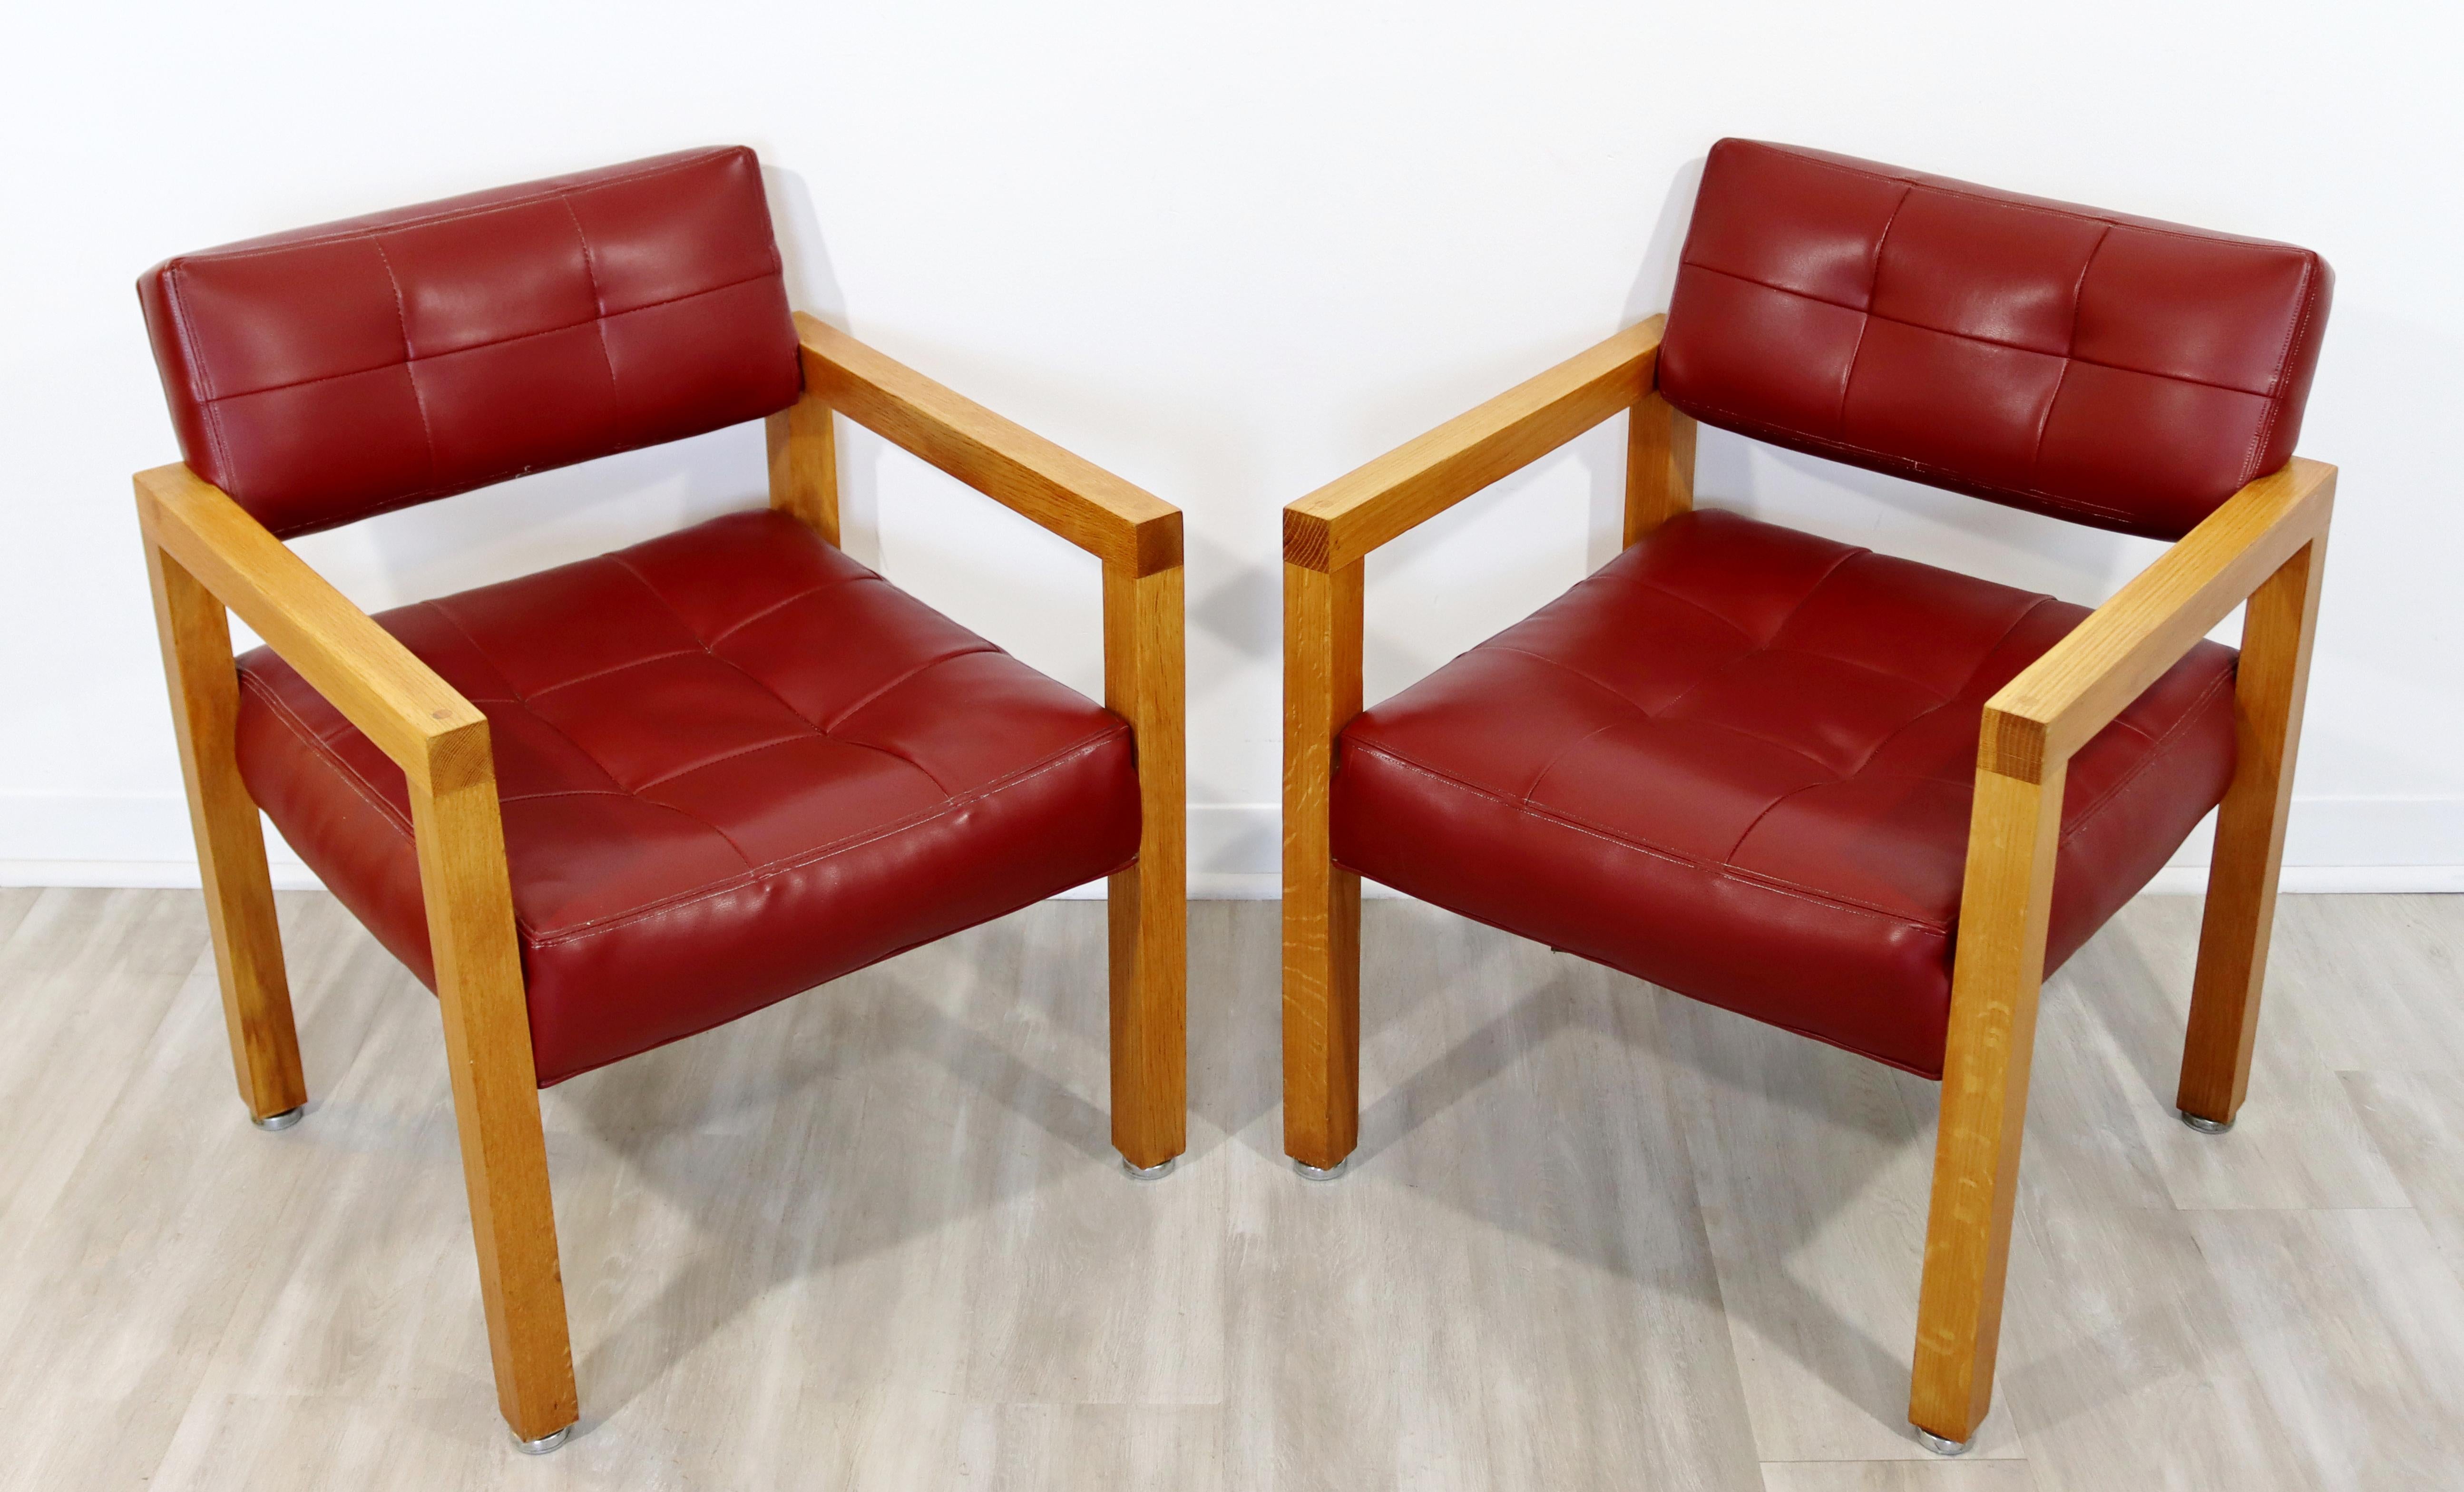 For your consideration is a gorgeous pair of leather upholstered lounge or accent armchairs, by Milo Baughman for Thayer Coggin, circa the 1970s. In good vintage condition. 

The dimensions are 23.5